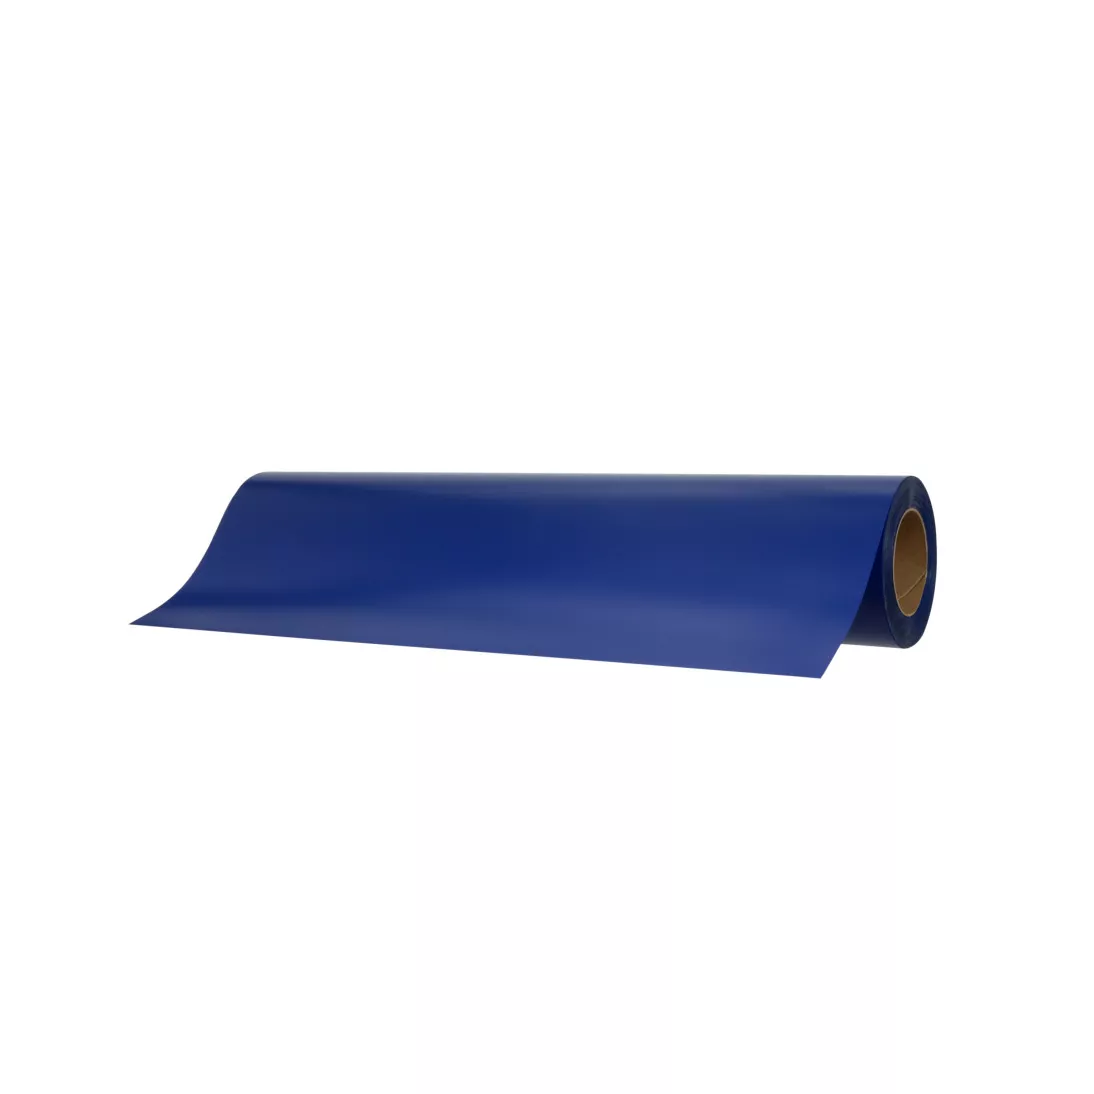 3M™ Scotchcal™ Translucent Graphic Film 3630-187, Infinity Blue, 48 in x
50 yd